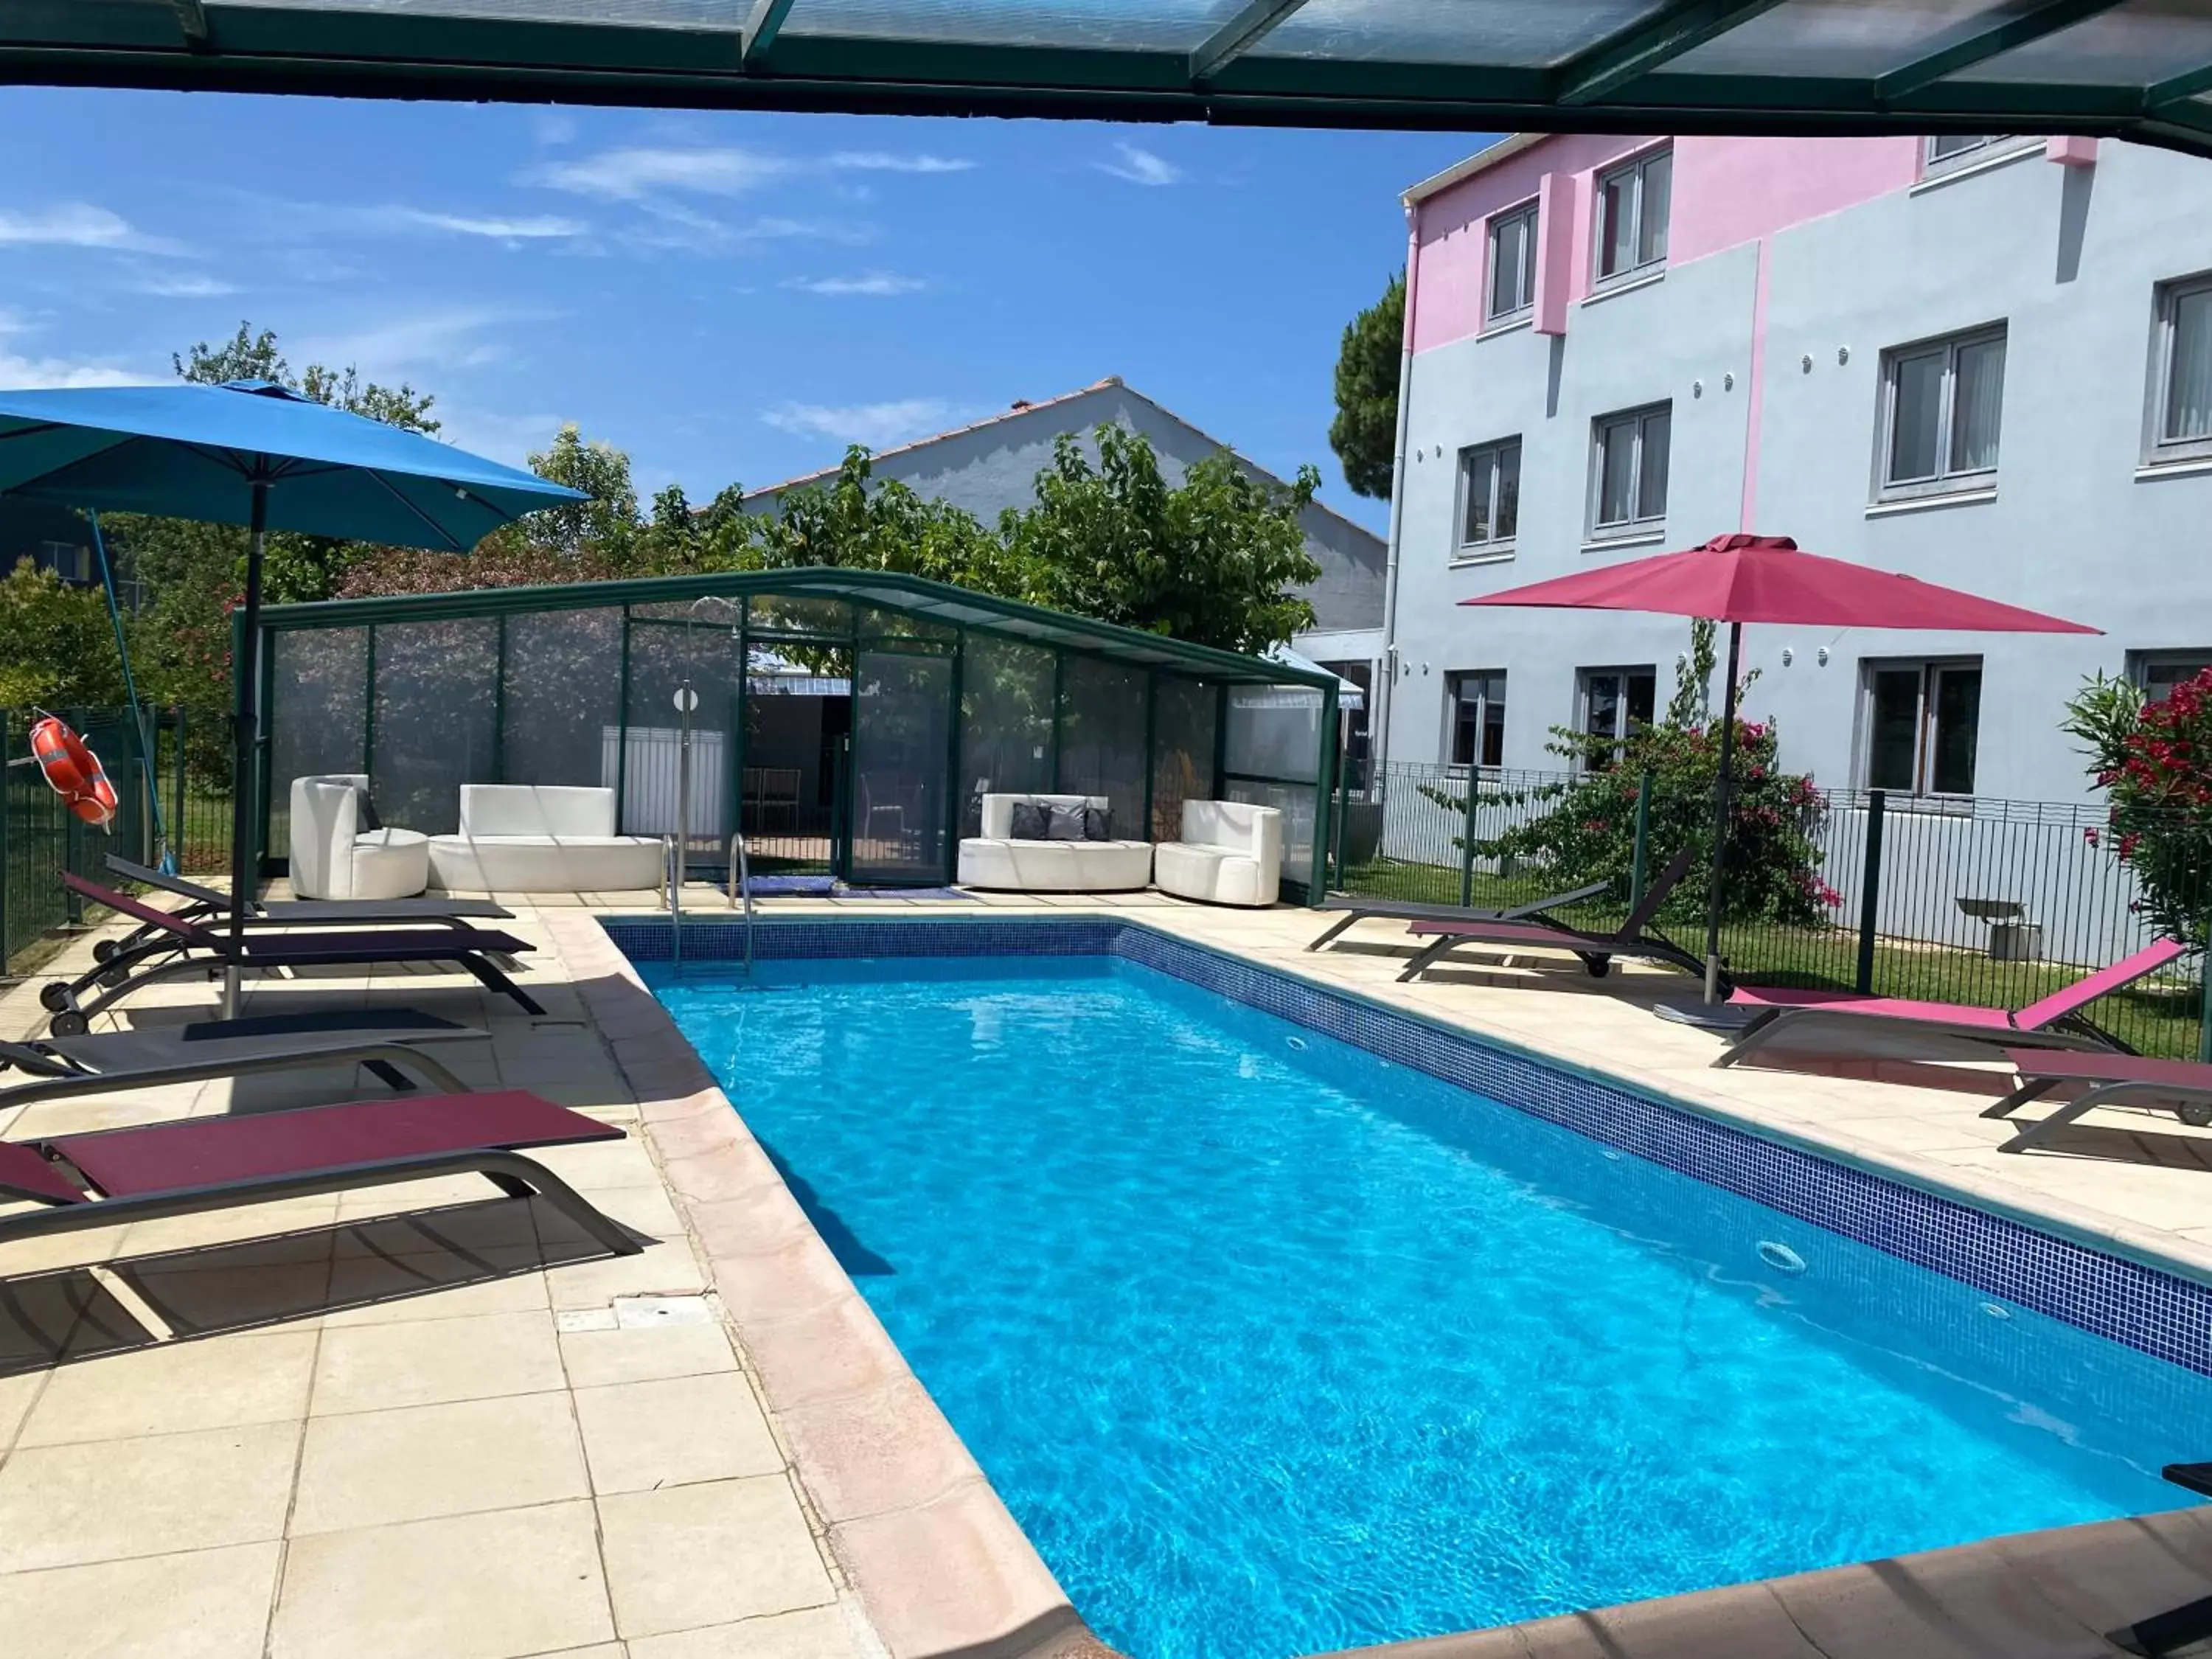 Property building, Swimming Pool in Kyriad Montpellier Aéroport - Gare Sud de France